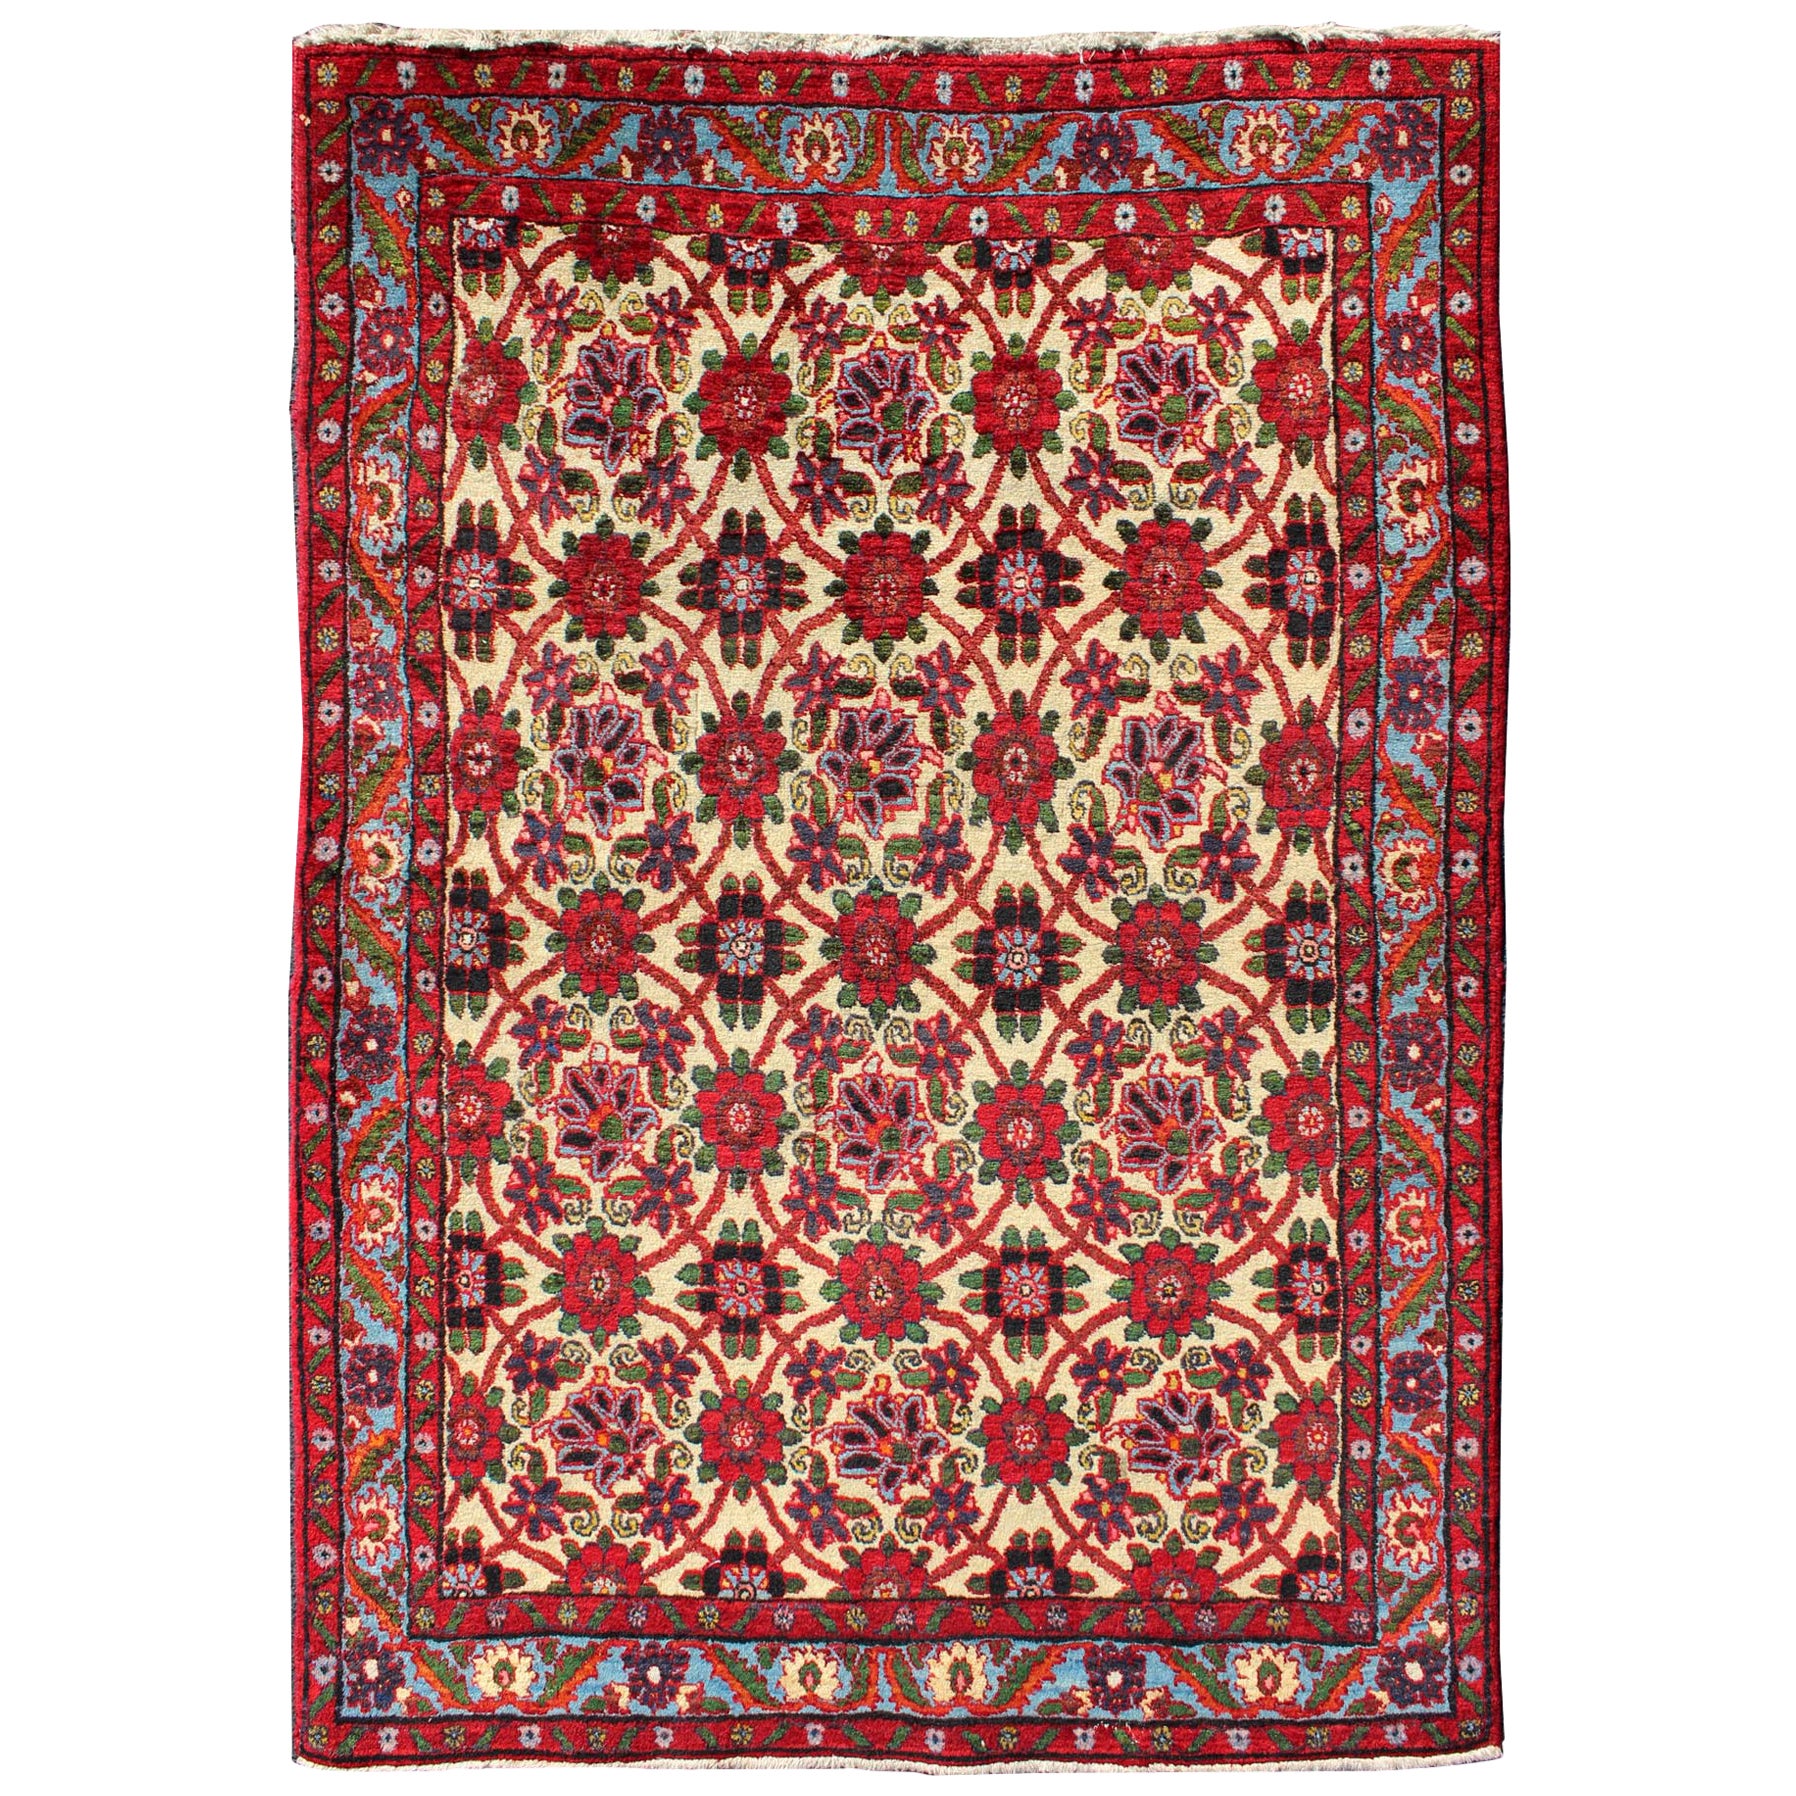 Semi Antique Persian Malayer Rug with Floral Pattern in Rich Red, Yellow Tones